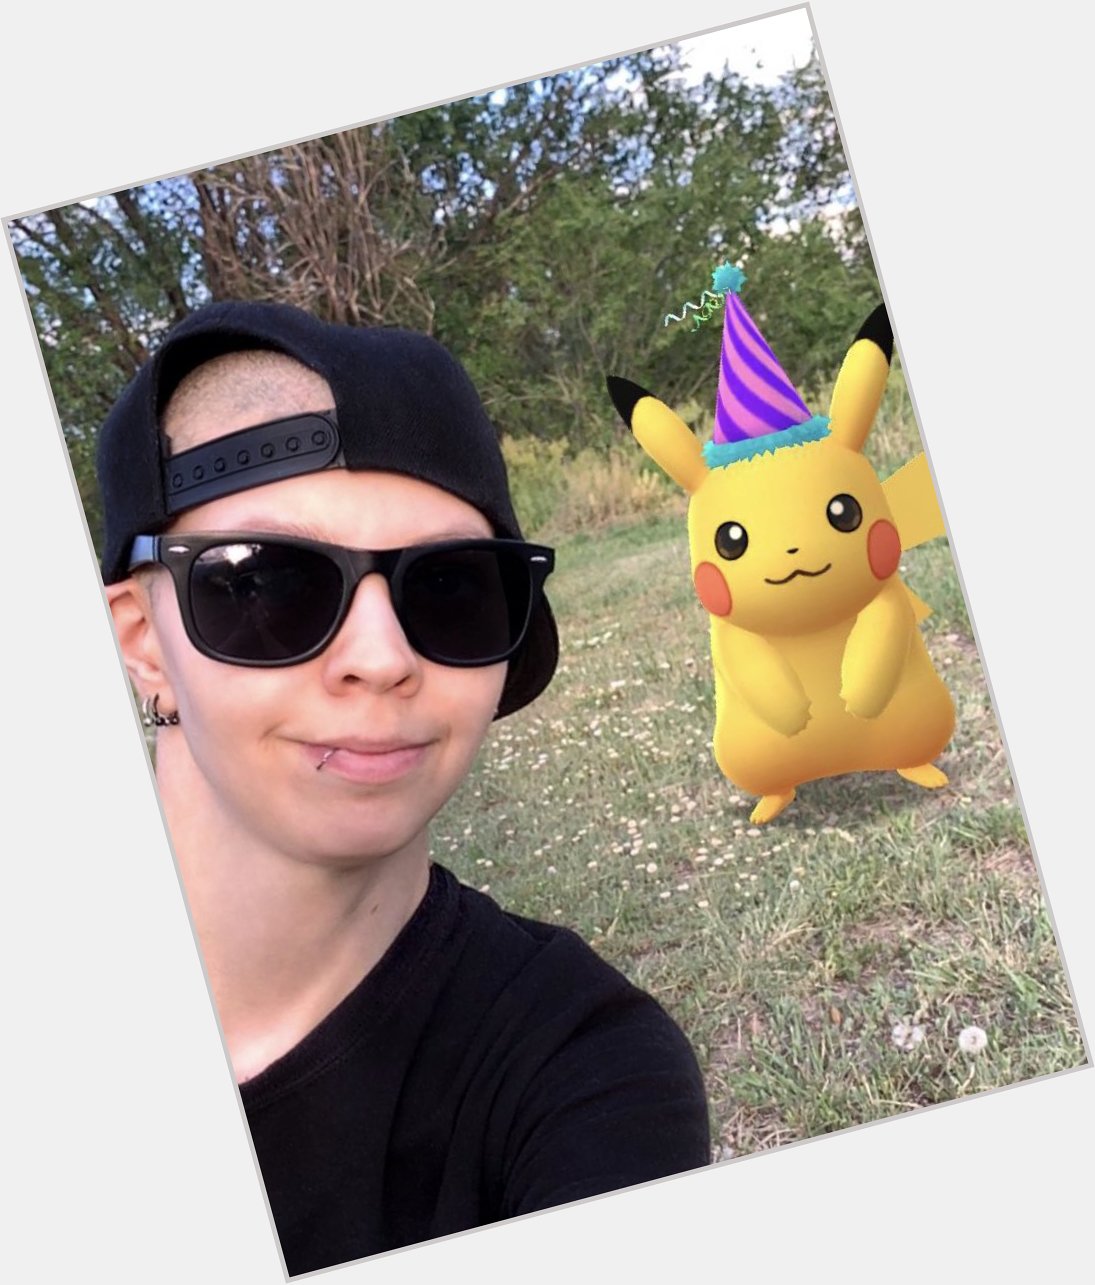  sorry I m a bit late but, HAPPY BIRTHDAY! 
From, me & party pikachu.      